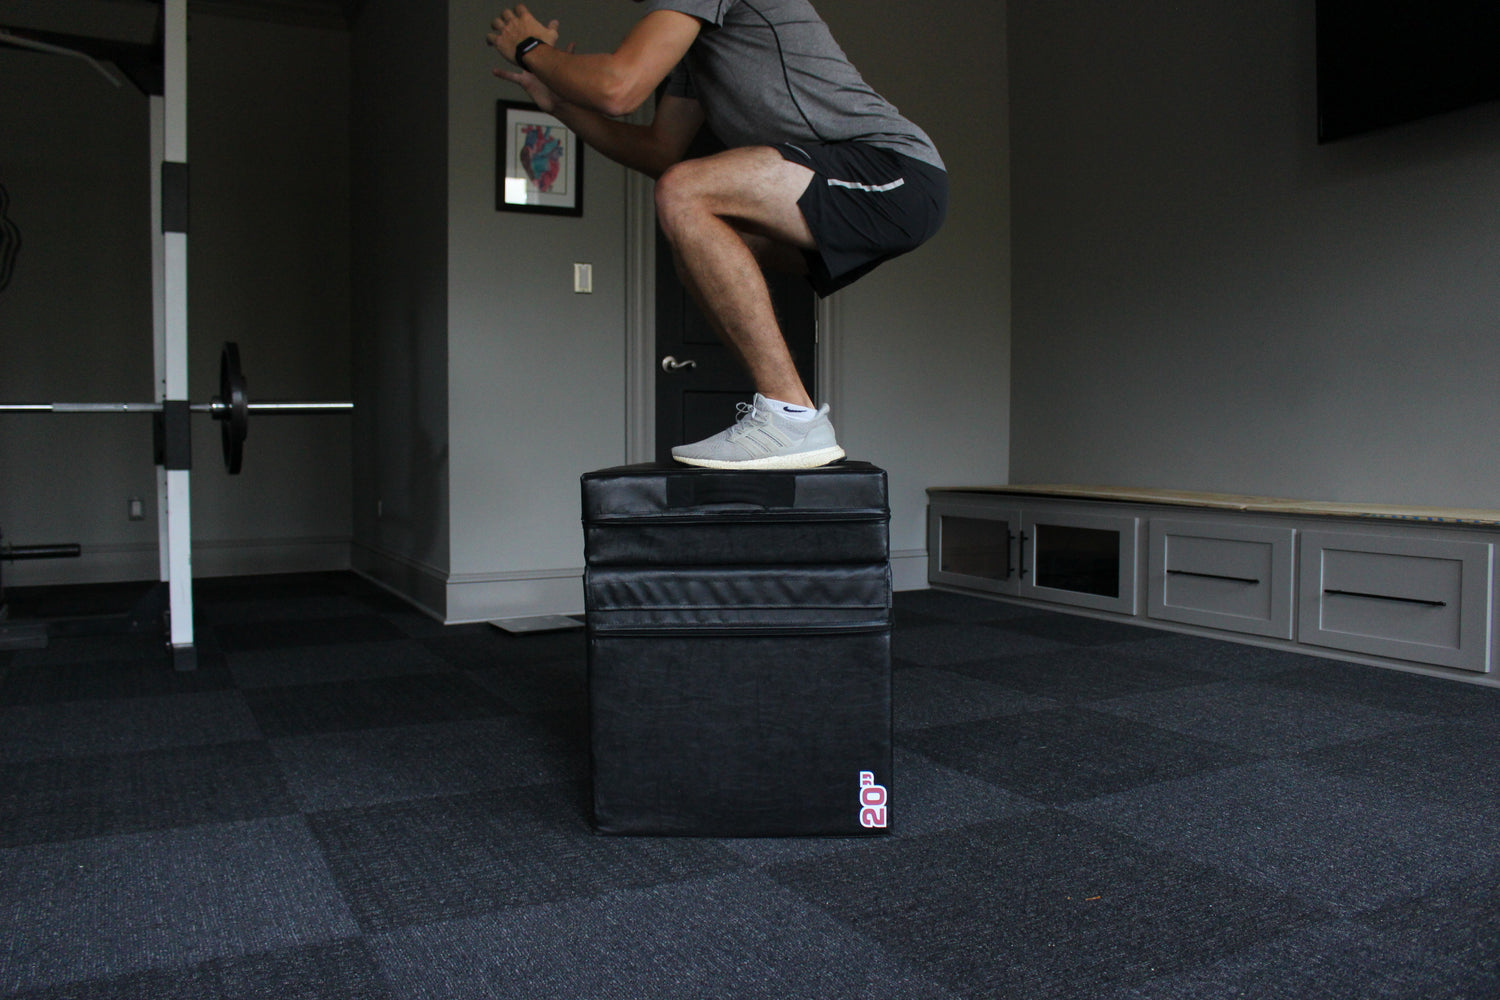 Kickstart Your New Year with This Dynamic Plyometric HIIT Workout - Get Fit in 2023!